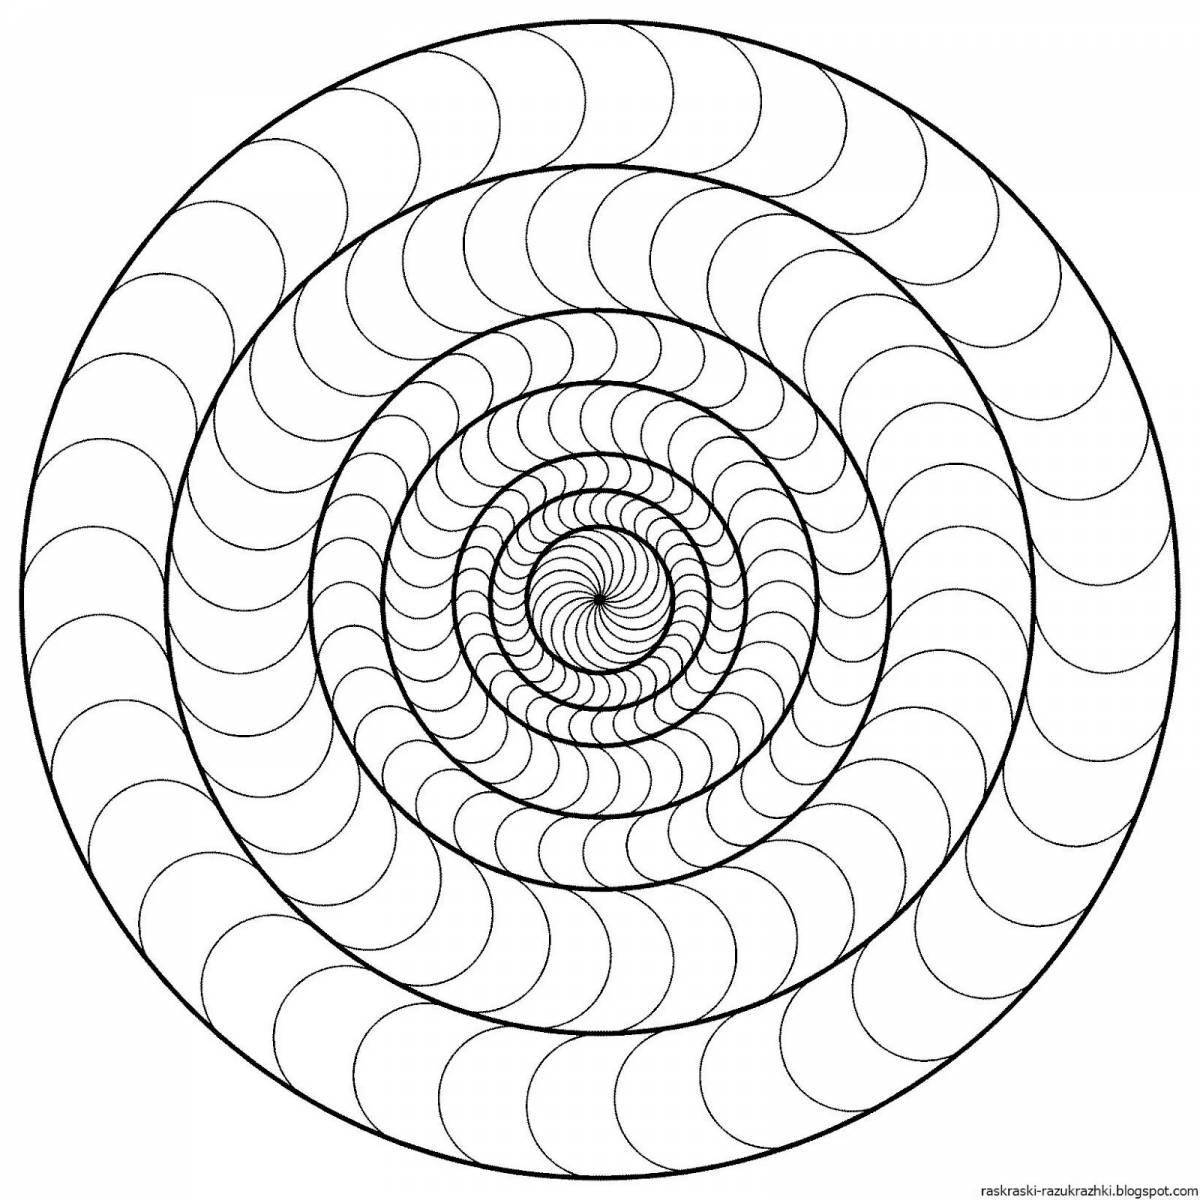 Coloring book shiny spiral lines